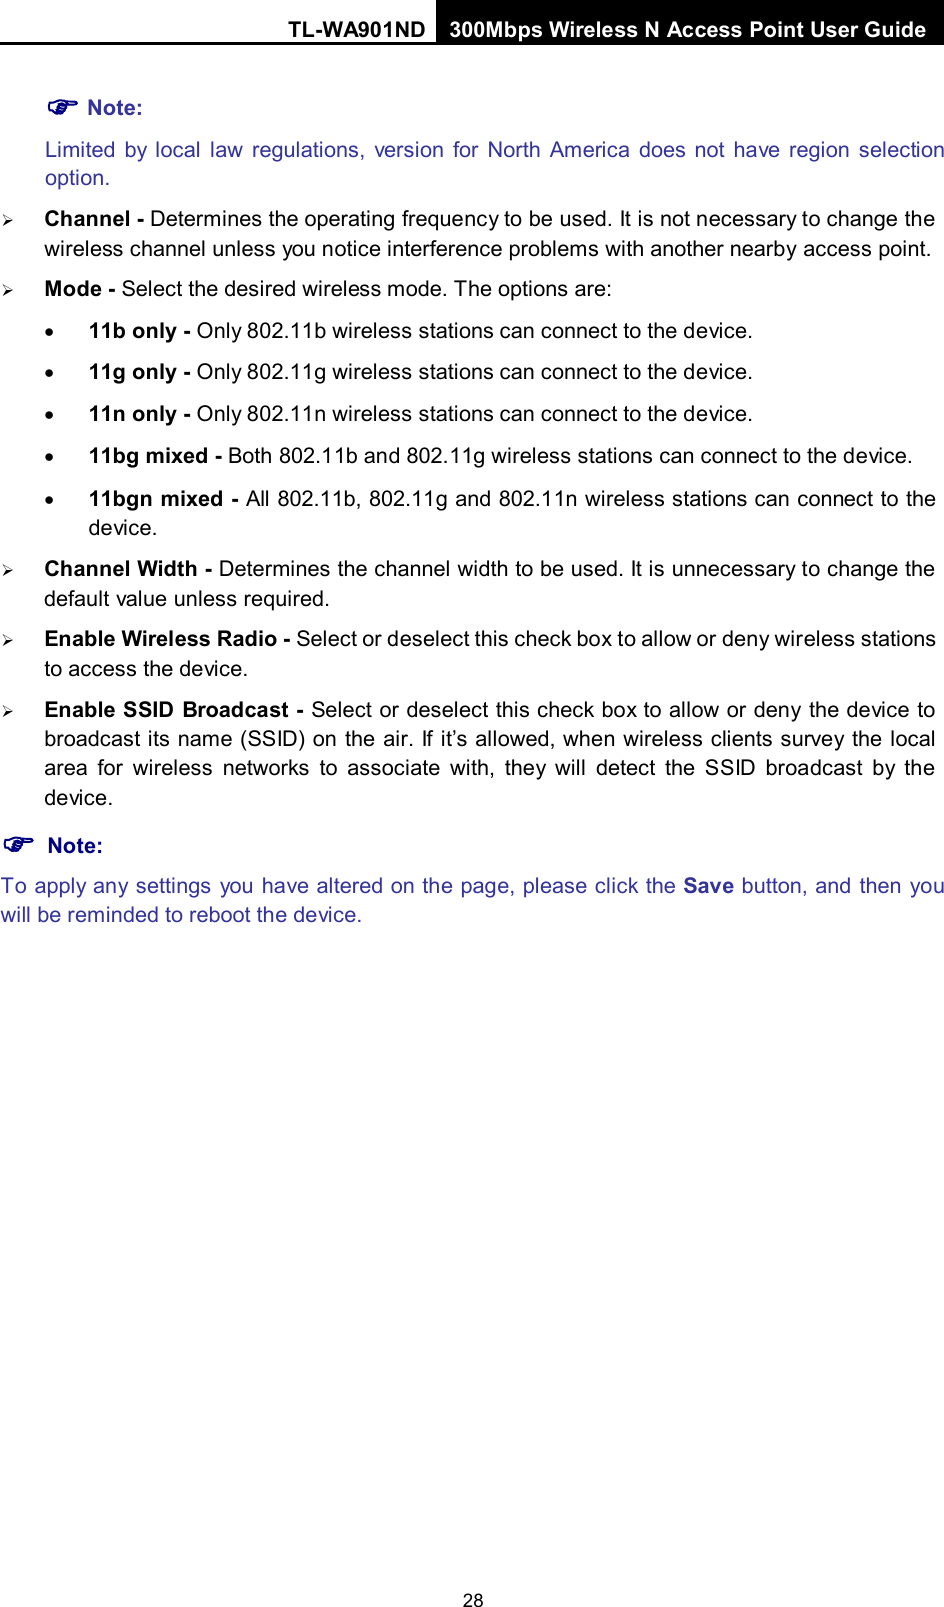 TL-WA901ND 300Mbps Wireless N Access Point User Guide  28  Note: Limited by local law regulations, version for North America does not have region selection option.  Channel - Determines the operating frequency to be used. It is not necessary to change the wireless channel unless you notice interference problems with another nearby access point.  Mode - Select the desired wireless mode. The options are: • 11b only - Only 802.11b wireless stations can connect to the device. • 11g only - Only 802.11g wireless stations can connect to the device. • 11n only - Only 802.11n wireless stations can connect to the device. • 11bg mixed - Both 802.11b and 802.11g wireless stations can connect to the device. • 11bgn mixed - All 802.11b, 802.11g and 802.11n wireless stations can connect to the device.  Channel Width - Determines the channel width to be used. It is unnecessary to change the default value unless required.  Enable Wireless Radio - Select or deselect this check box to allow or deny wireless stations to access the device.    Enable SSID Broadcast - Select or deselect this check box to allow or deny the device to broadcast its name (SSID) on the air. If it’s allowed, when wireless clients survey the local area for wireless networks to associate with, they will detect the SSID broadcast by the device.    Note: To apply any settings you have altered on the page, please click the Save button, and then you will be reminded to reboot the device. 